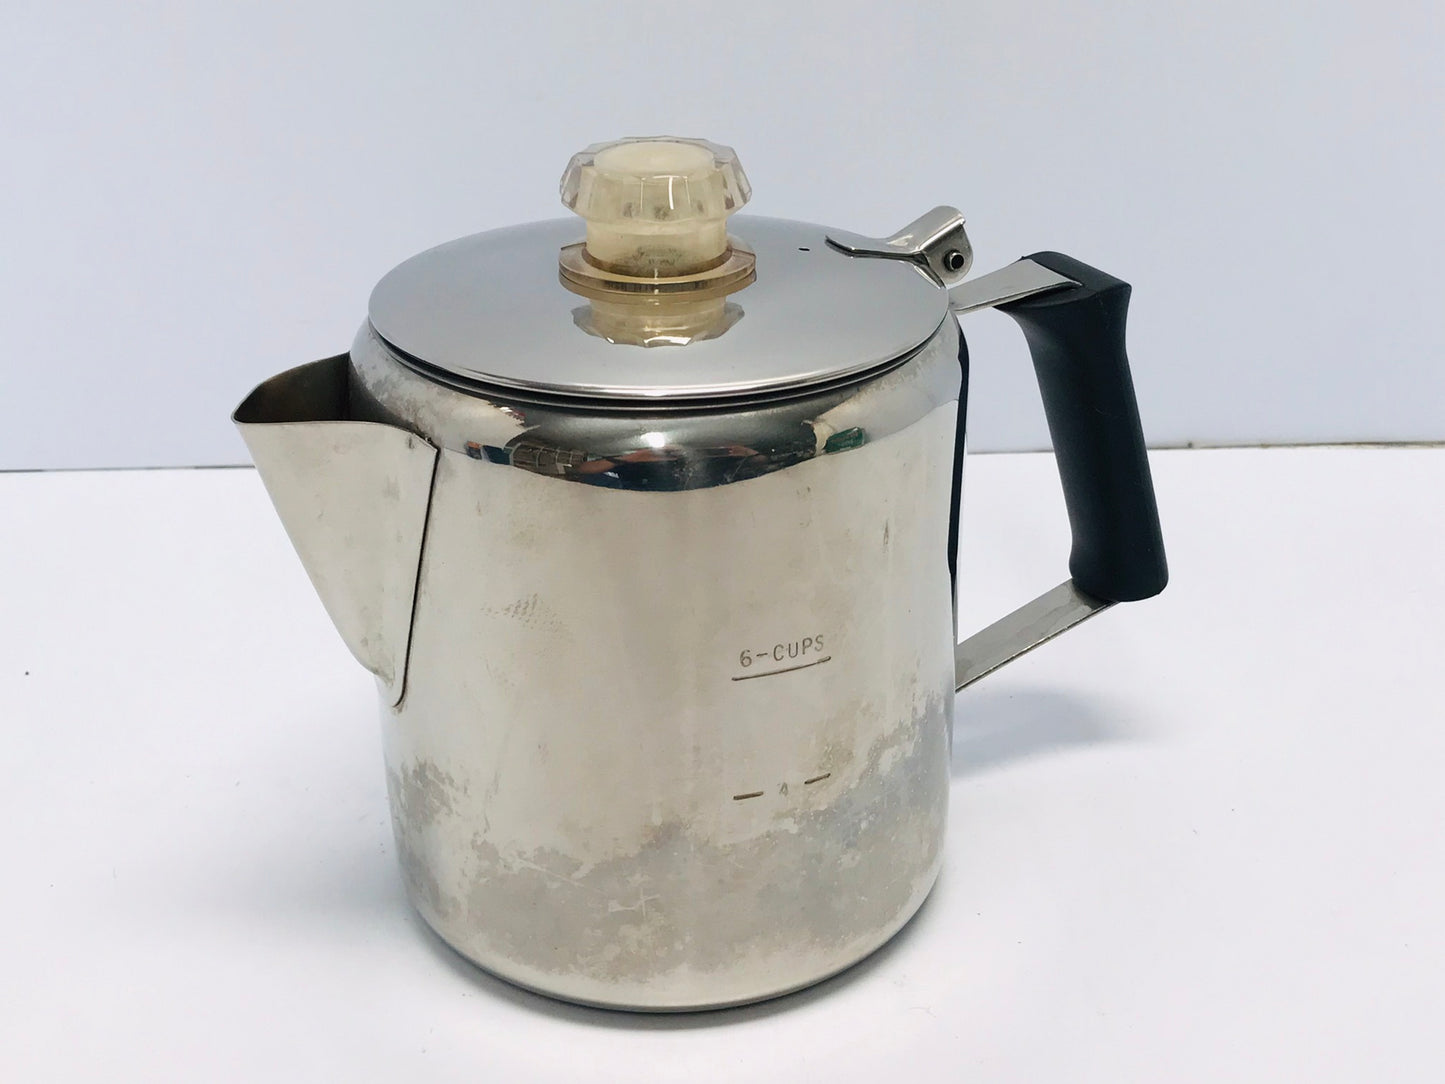 Camping Coffee Pot Perolator 4-6 cup Stainless Steel Rustproof Fast Heat Up Outdoor Use Excellent As New